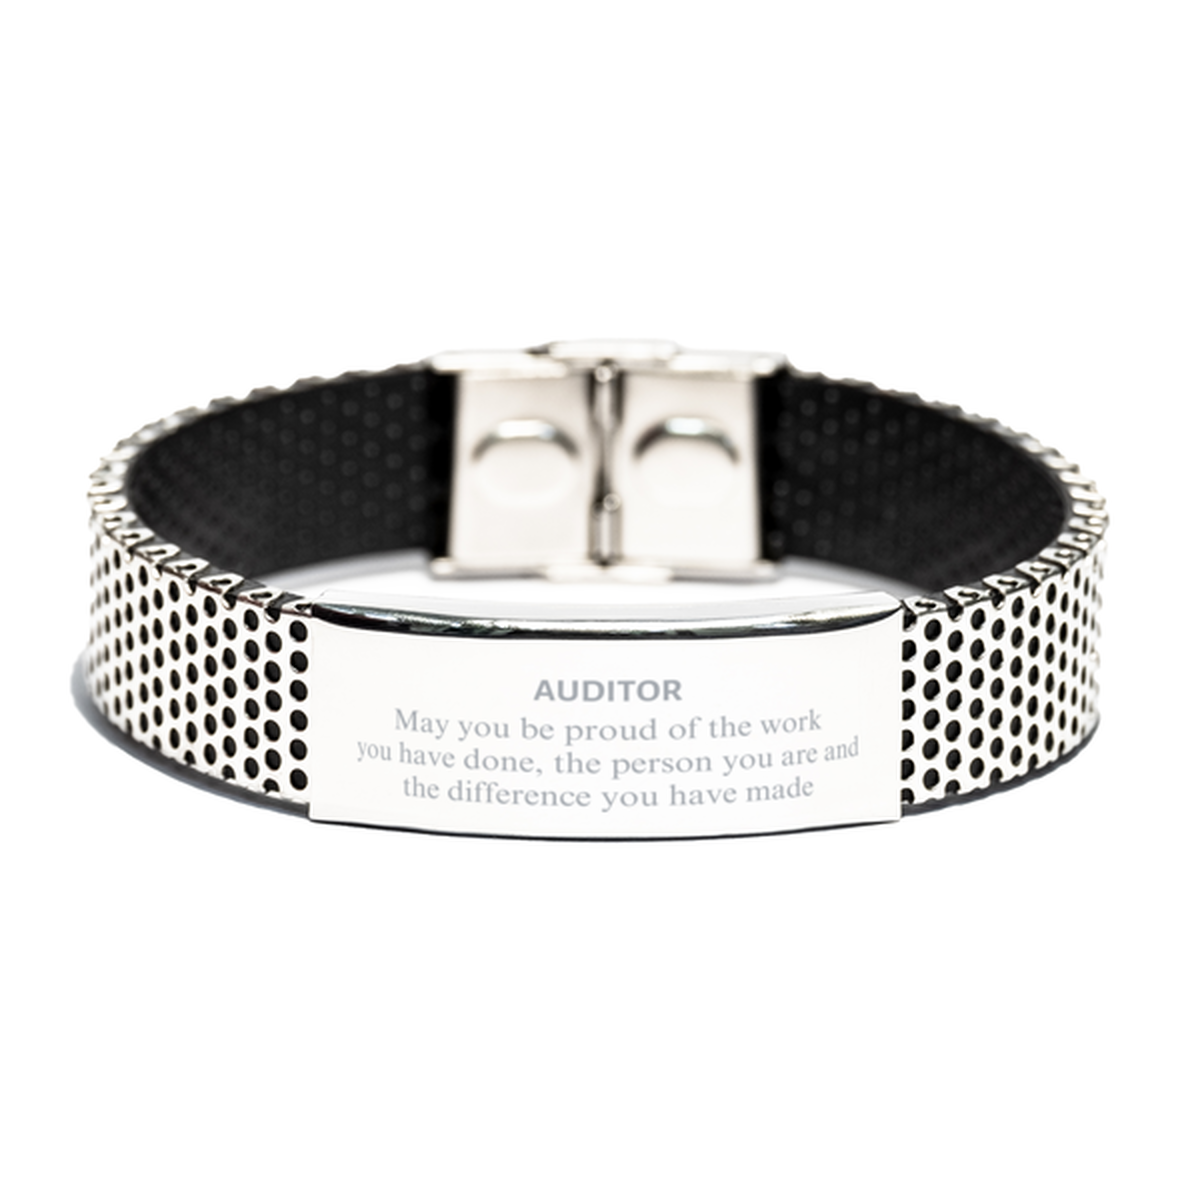 Auditor May you be proud of the work you have done, Retirement Auditor Stainless Steel Bracelet for Colleague Appreciation Gifts Amazing for Auditor